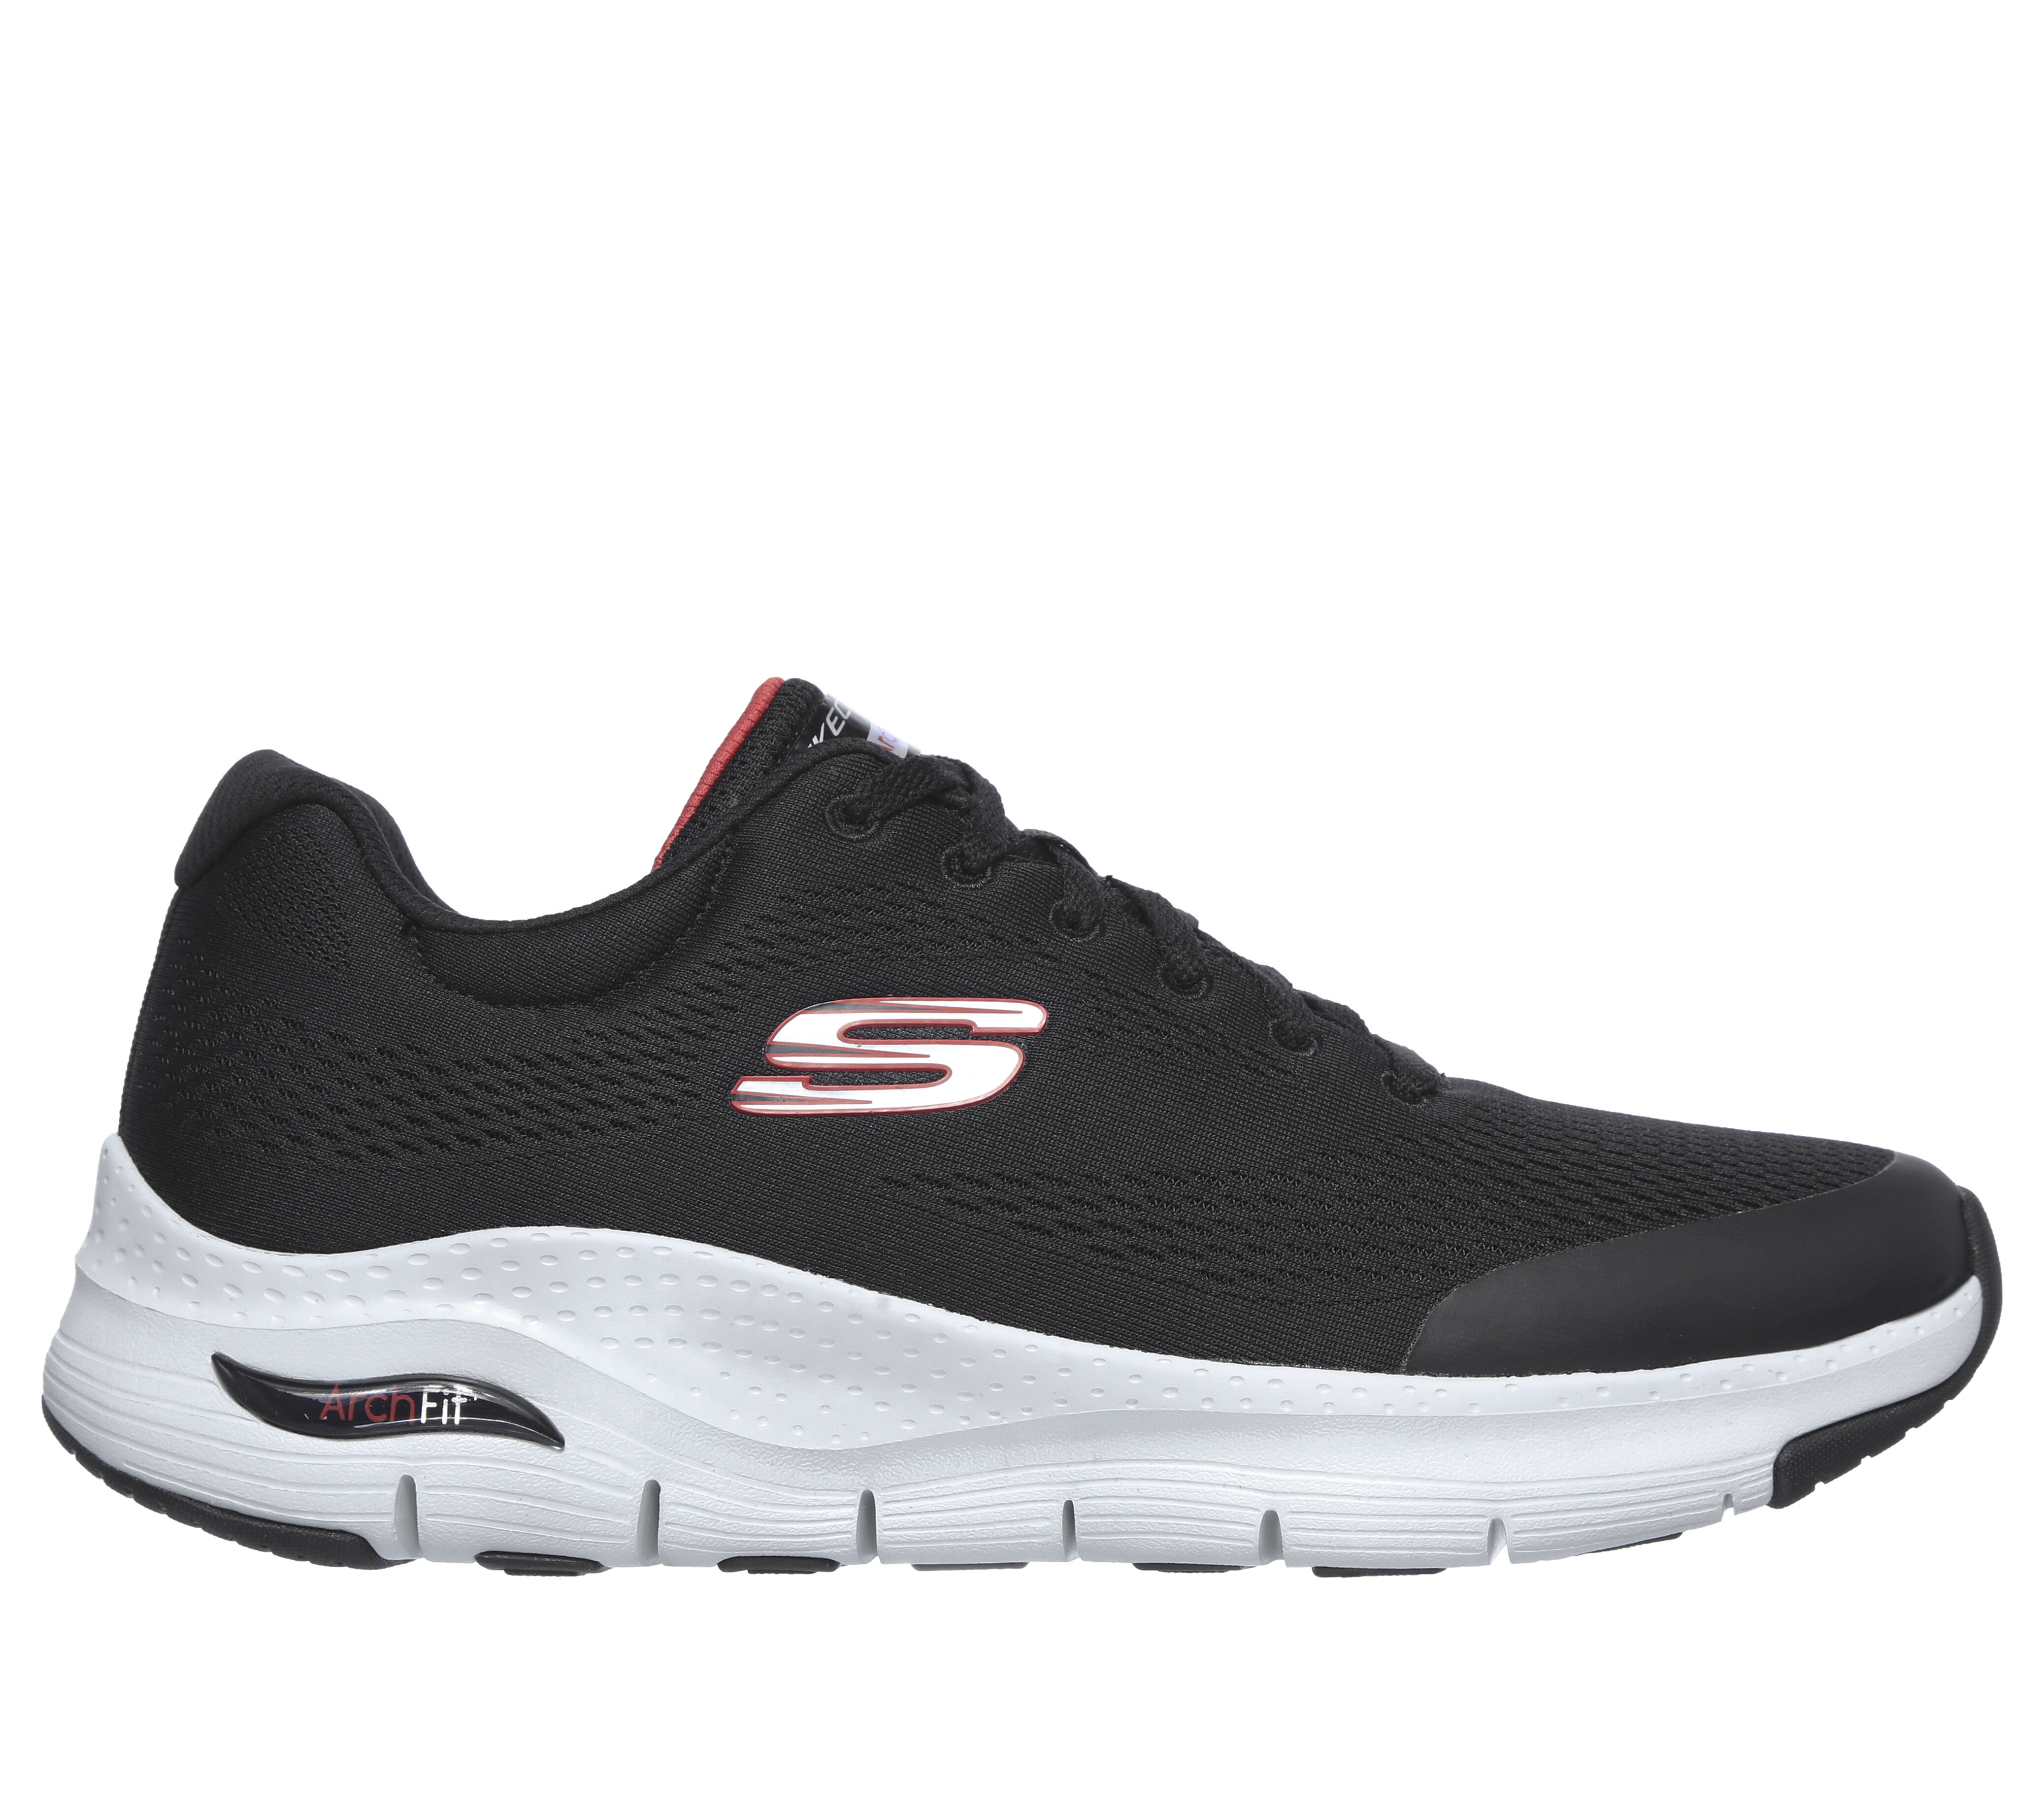 skechers air sports shoes